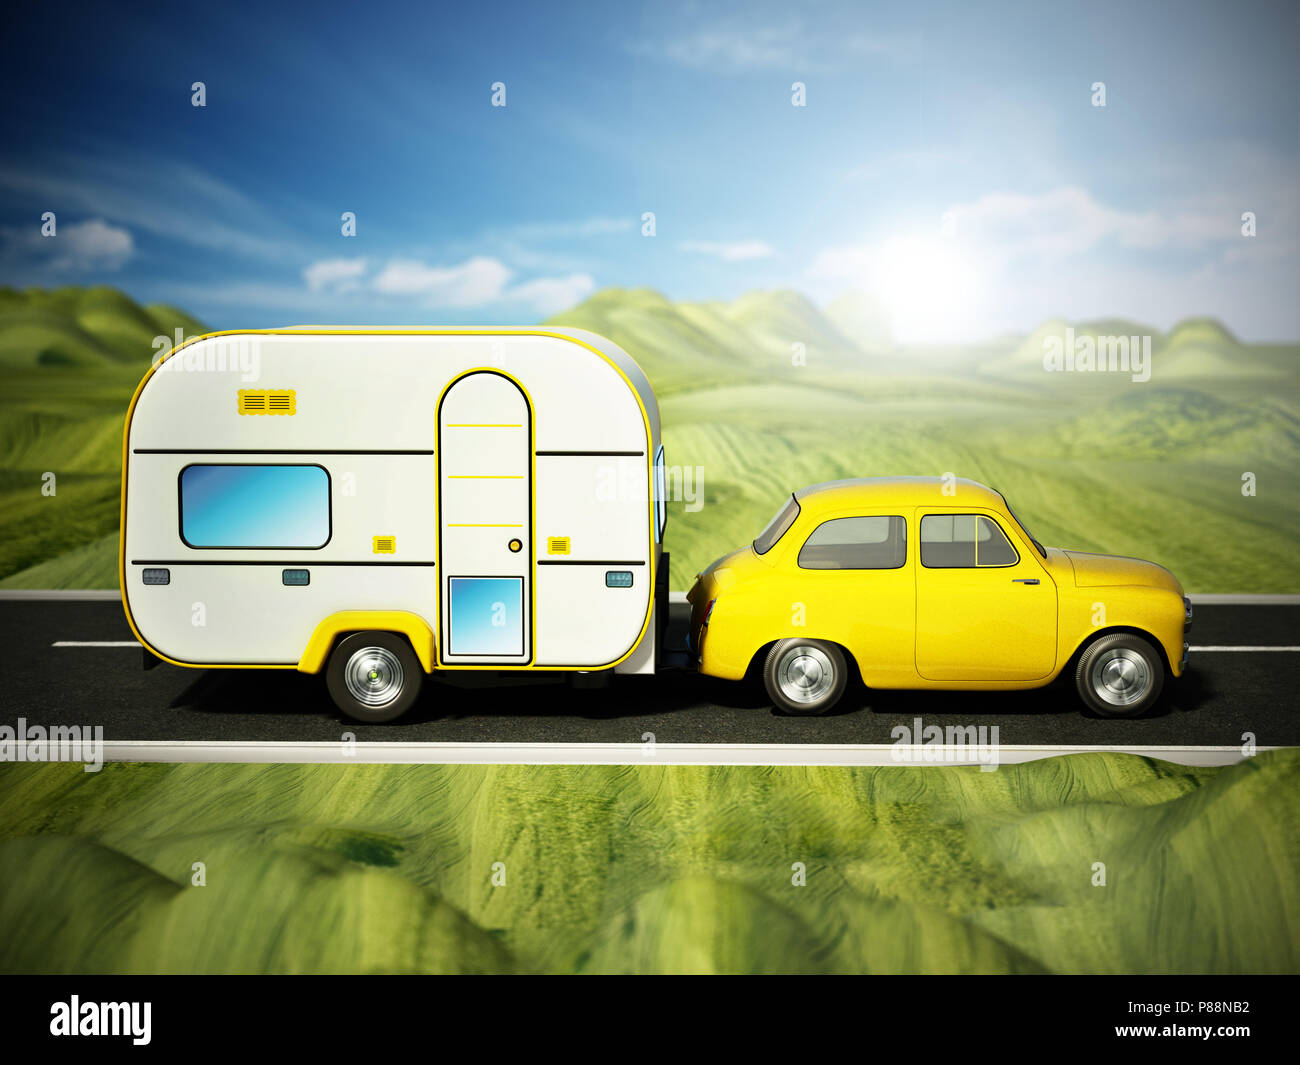 Yellow vintage car on the road with caravan. 3D illustration. Stock Photo